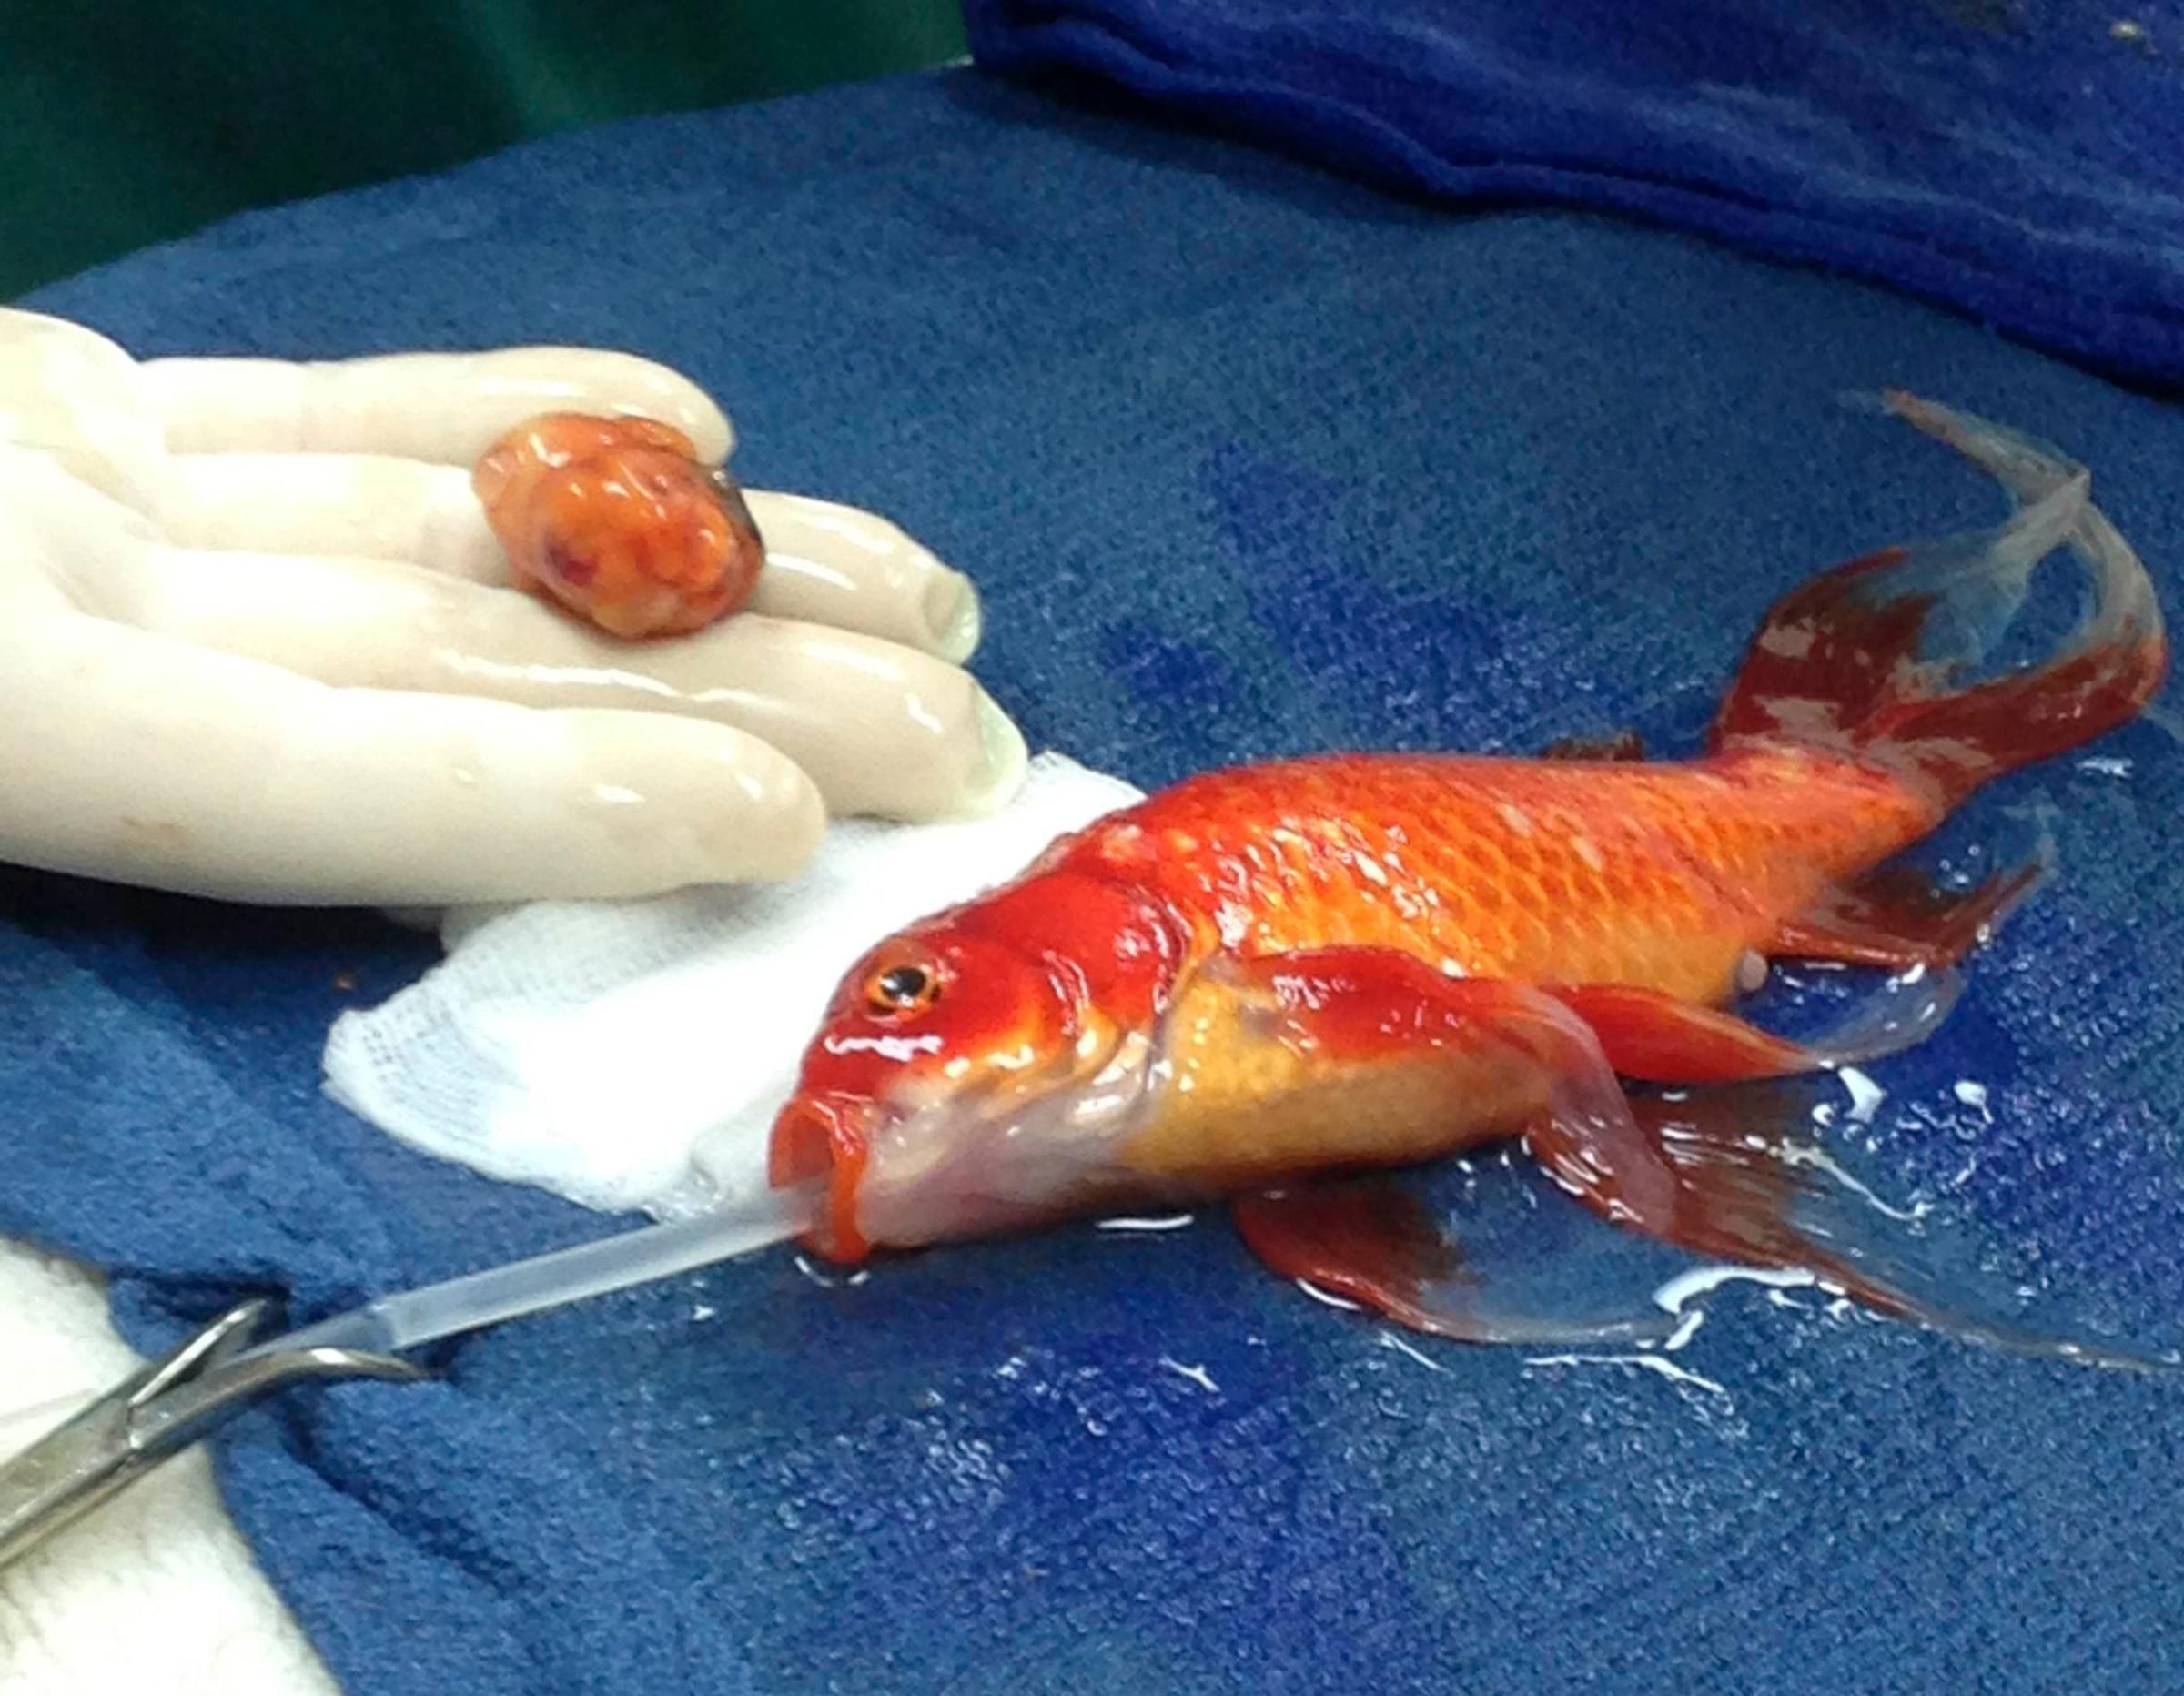 Veterinarian Tristan Rich removes a life-threatening head tumor from George, a 10-year-old pet goldfish, on Sept. 11, 2014.